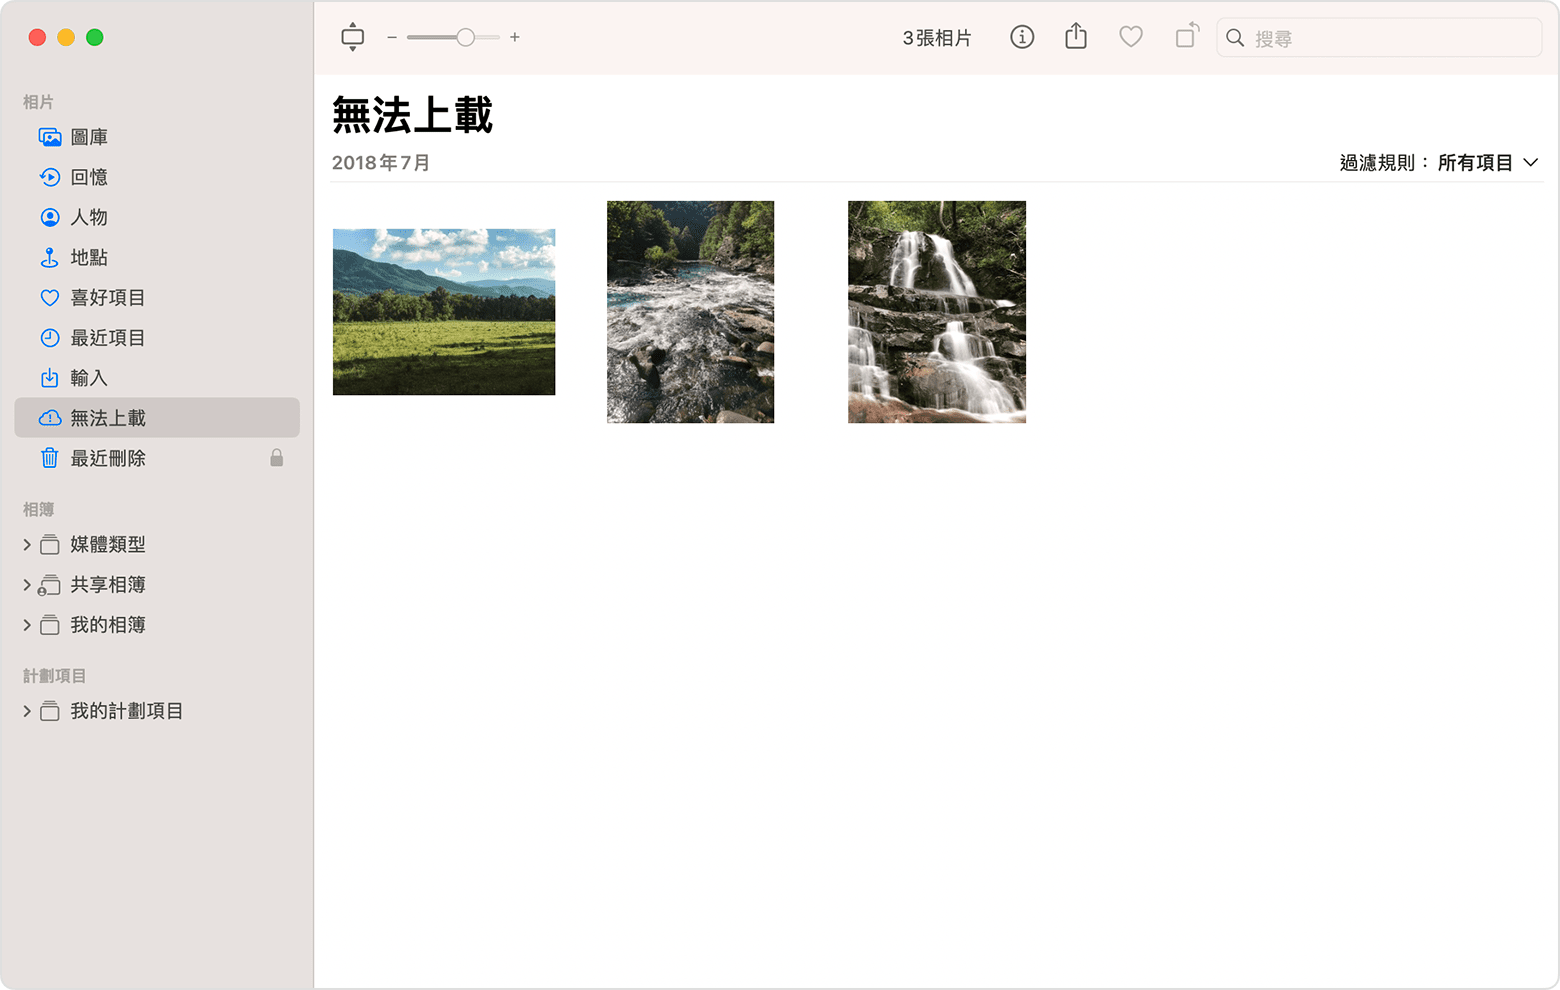 You can see photos that did not upload to your iCloud Photo Library in the Unable to Upload folder.